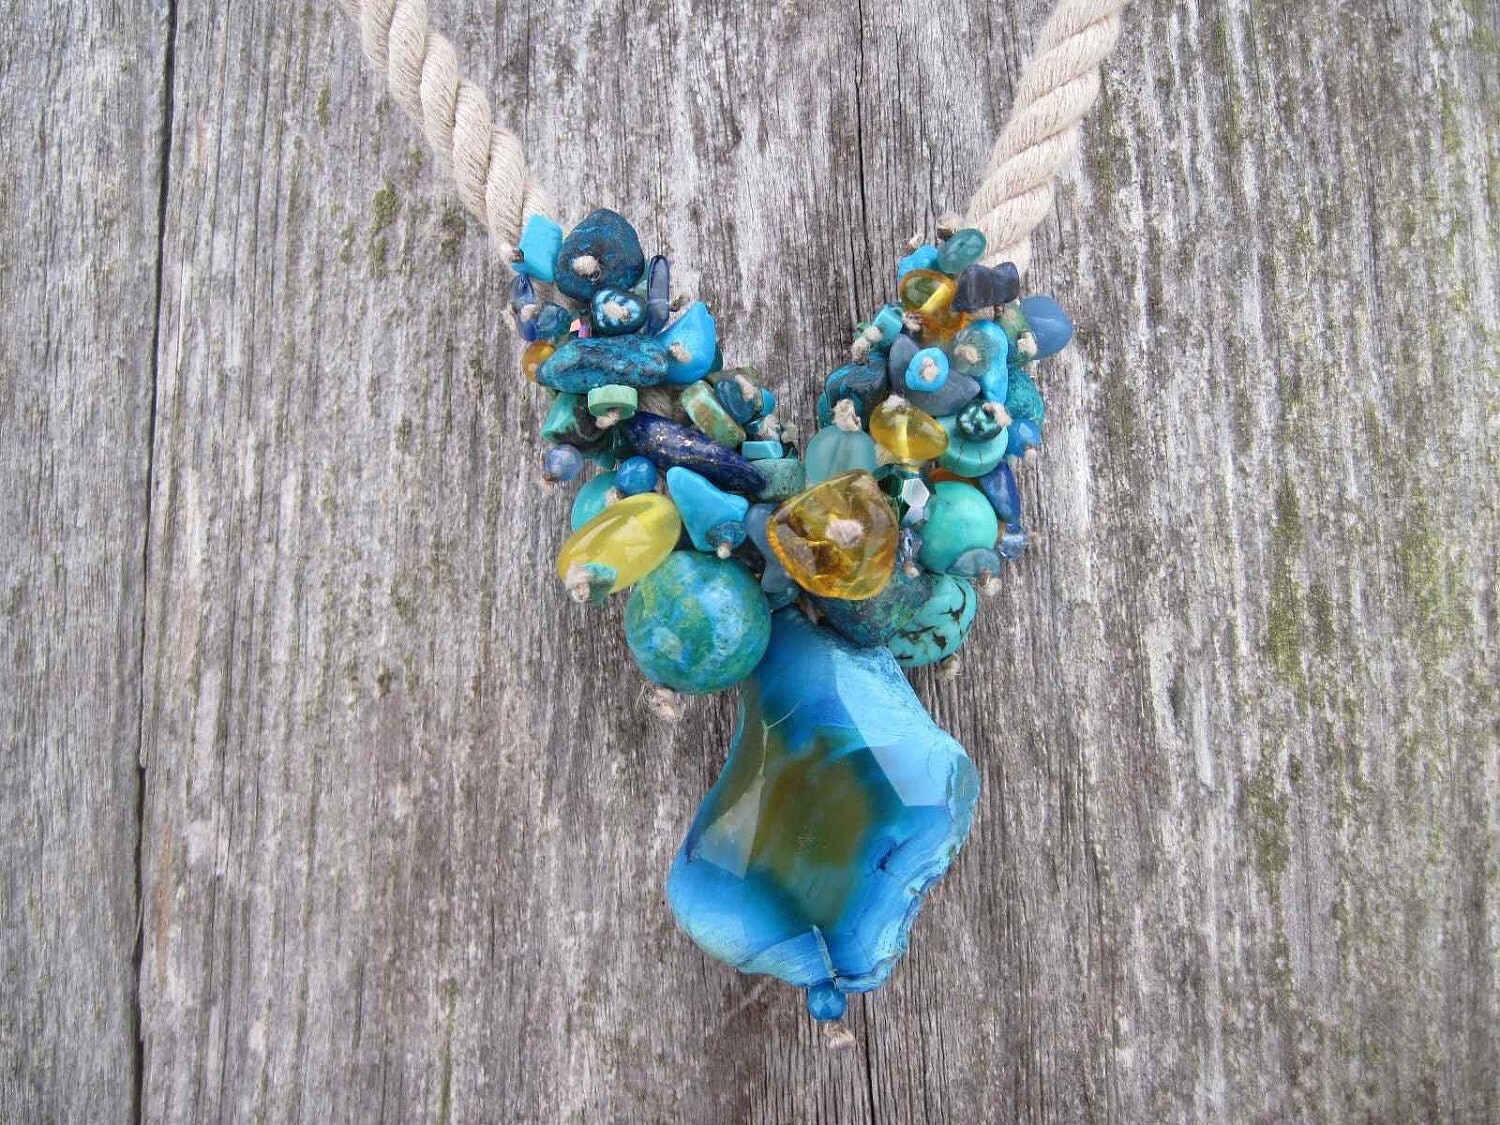 Baltic Amber Turquoise Necklace, Agua Del Mar Natural Stone Agate, Linen Necklace, Blue Teal Yellow Honey, Sailor Rope Necklace